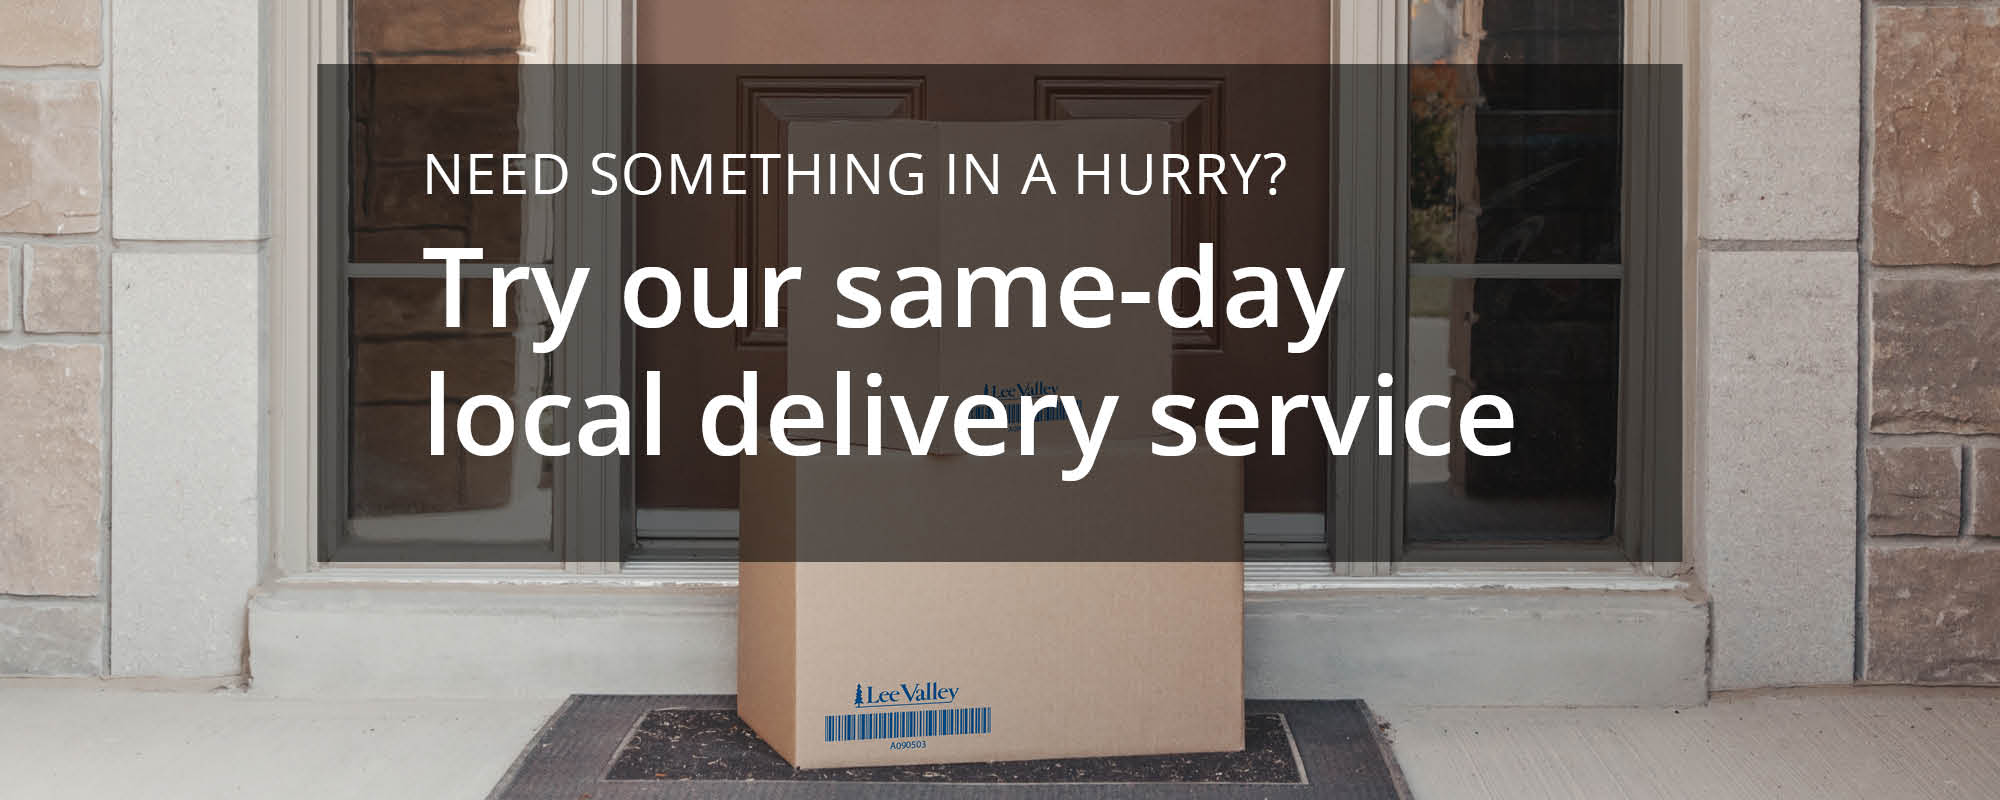 Need something in a hurry? Try our same-day local delivery service.